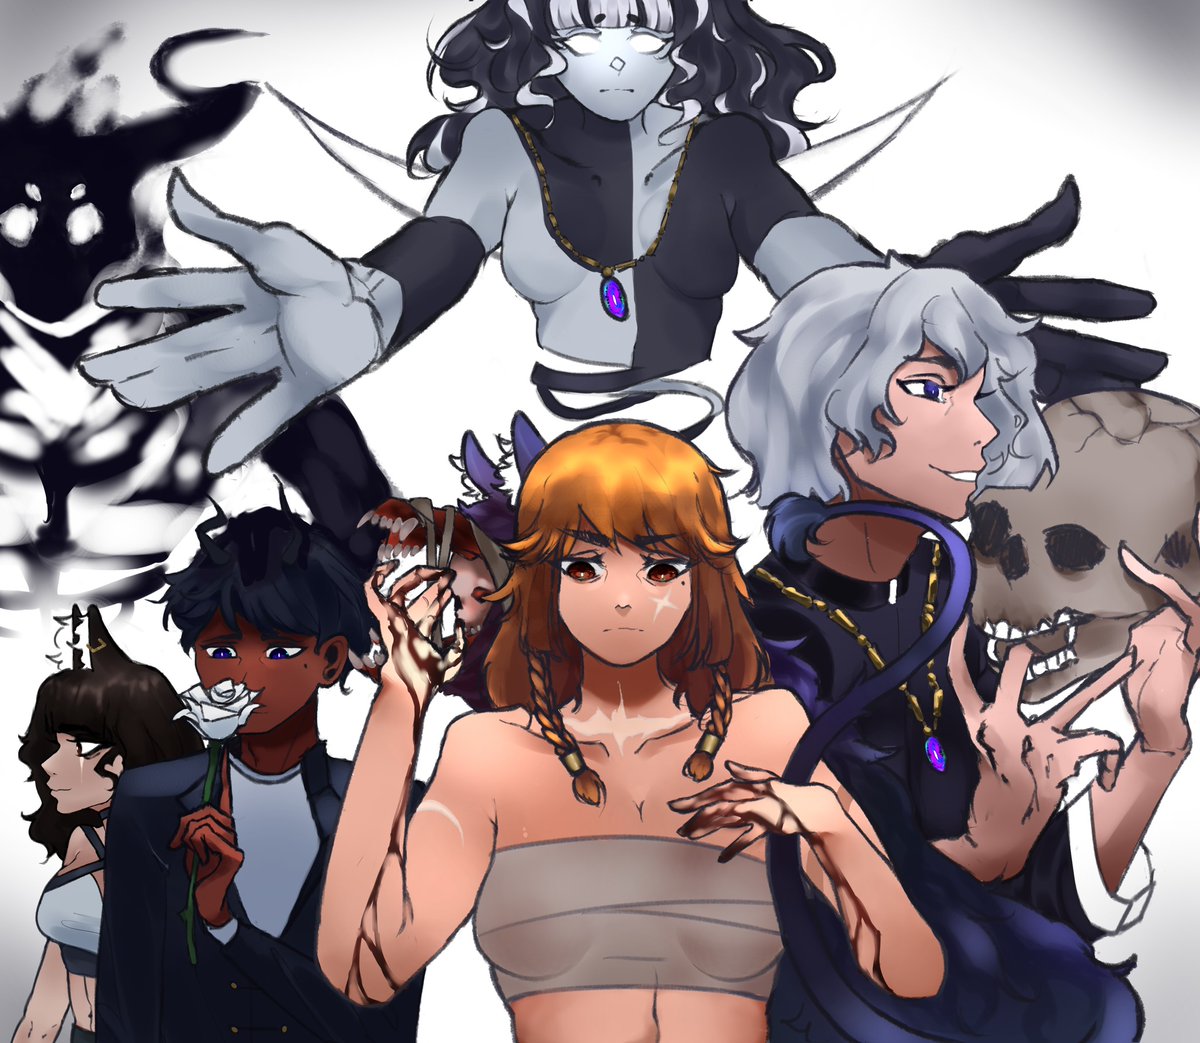 Sry for not tweeting for such a long time. Here are some of my oc’s
#art #digitalart #digitalpainting #originalcharacterart #originalart #originalcharacters #OriginalContentArtist #redhead #scars #Demon #skull #boost #kemono #necklace #MonsterMonday